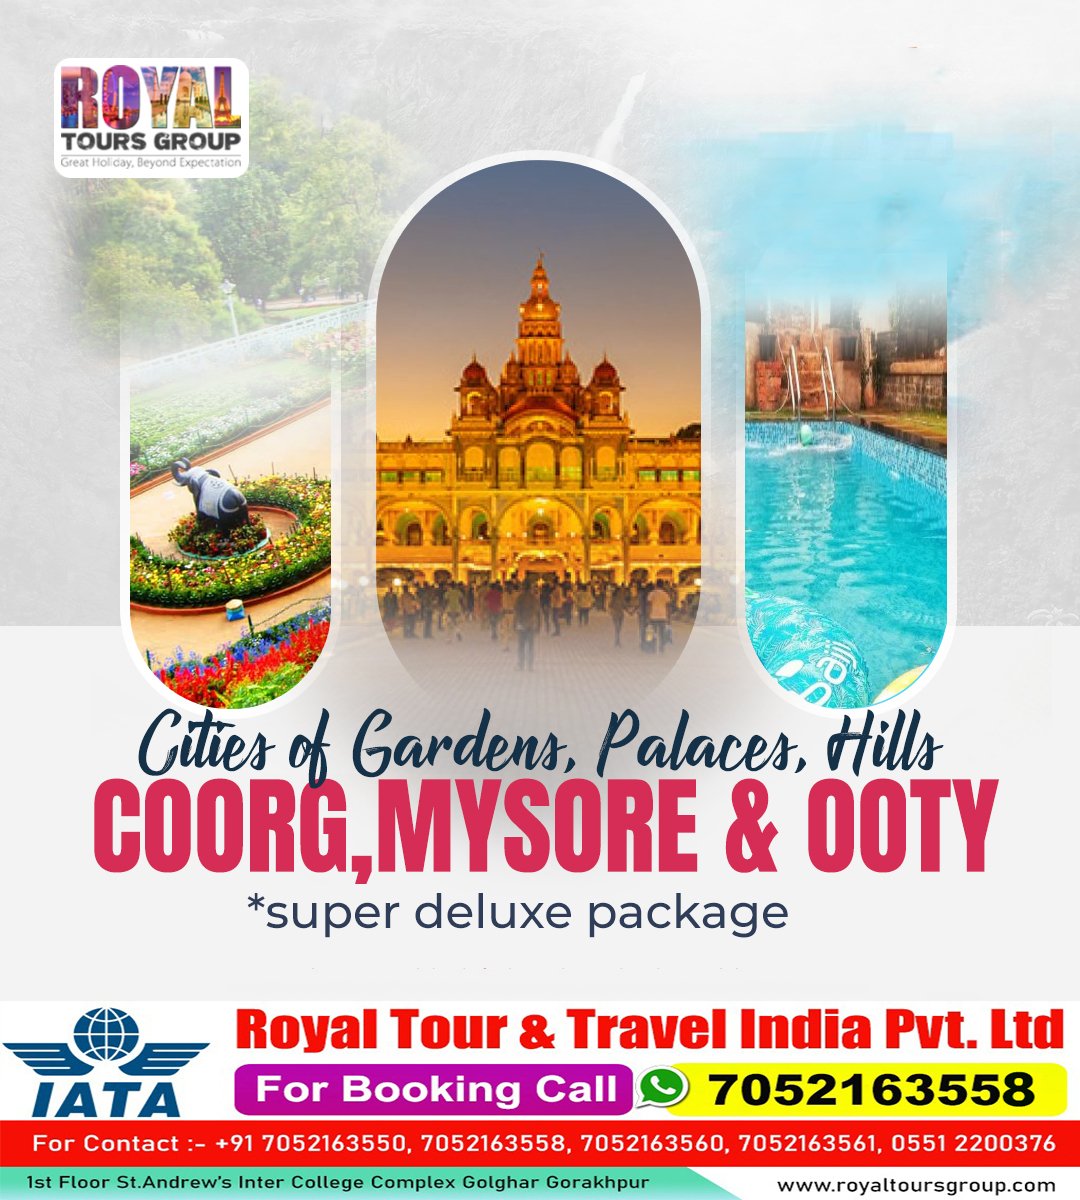 For Booking Call :- 070521 63558
-----------------------------------------
info@royaltoursgroup.com
-----------------------------------------
royaltoursgroup.com
#royalholidaysgorakhpur
#thinkdubaithinkroyaltour
#travelagent #travel #tourism #ooty #ootytrip #ootytourism